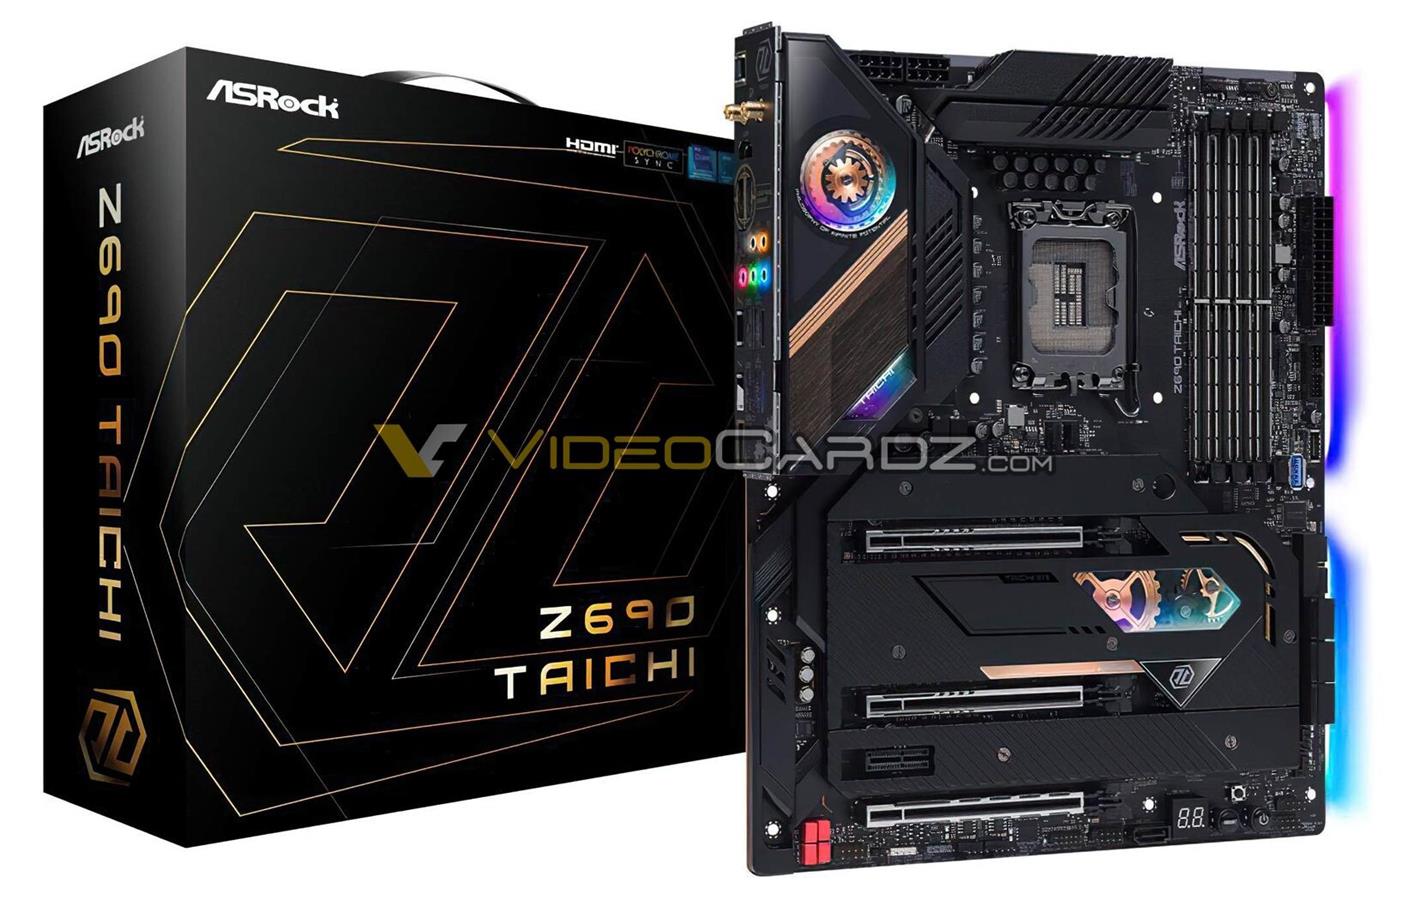 ASRock Z690 motherboard prices revealed.  How much will we pay for the new MOBO generation?